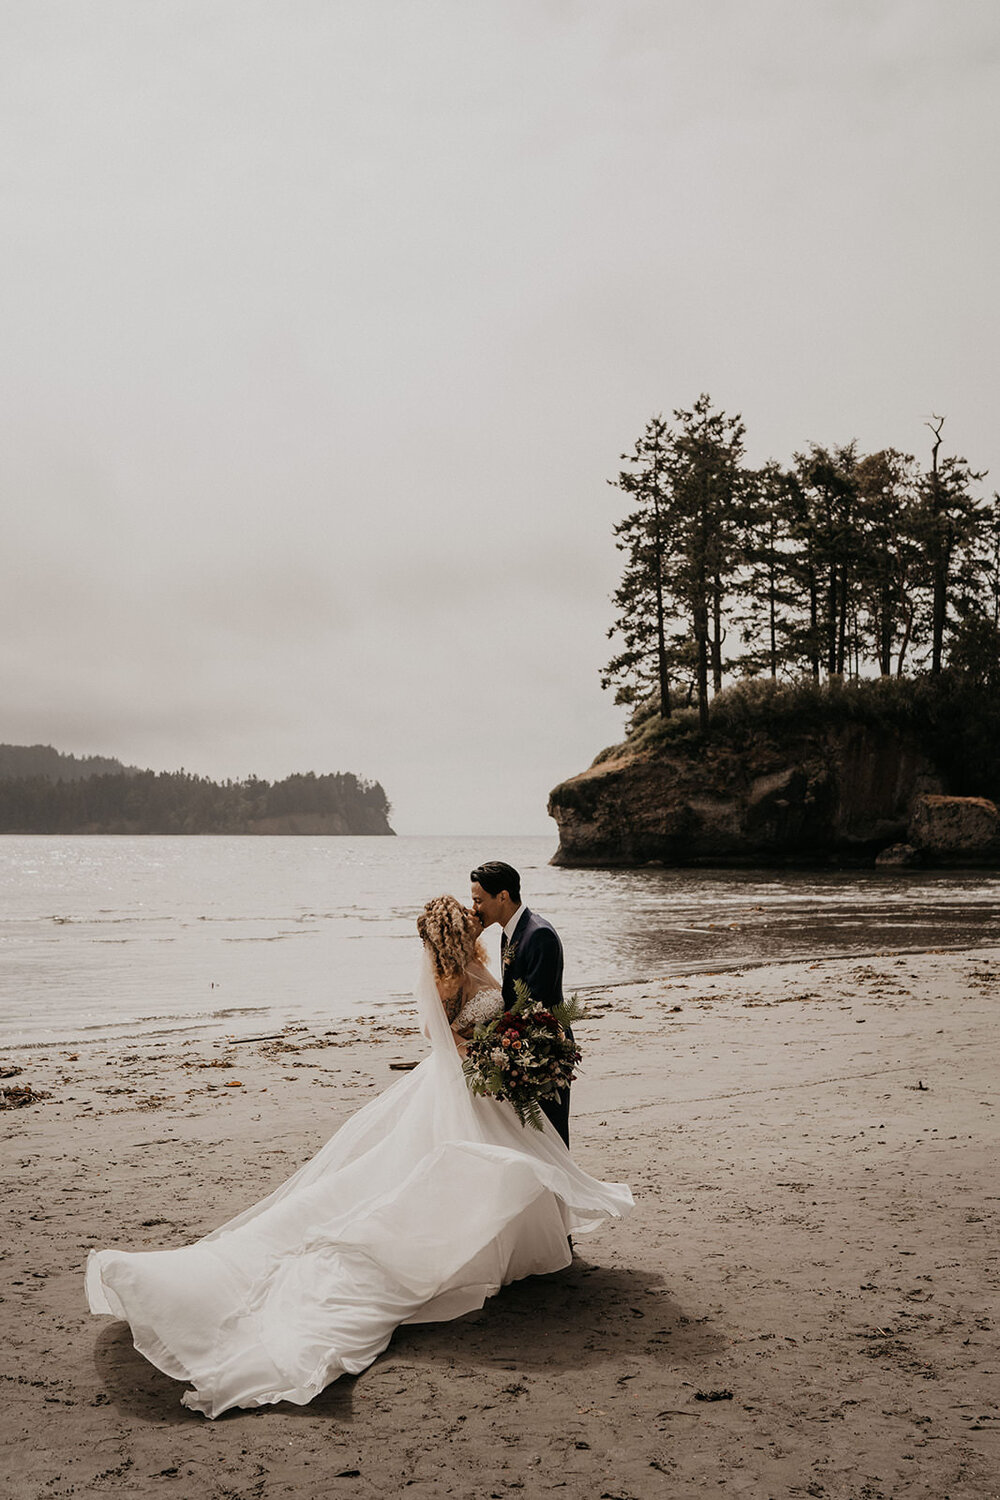 How Much Does It Cost To Elope? - Elopement Planning Tips